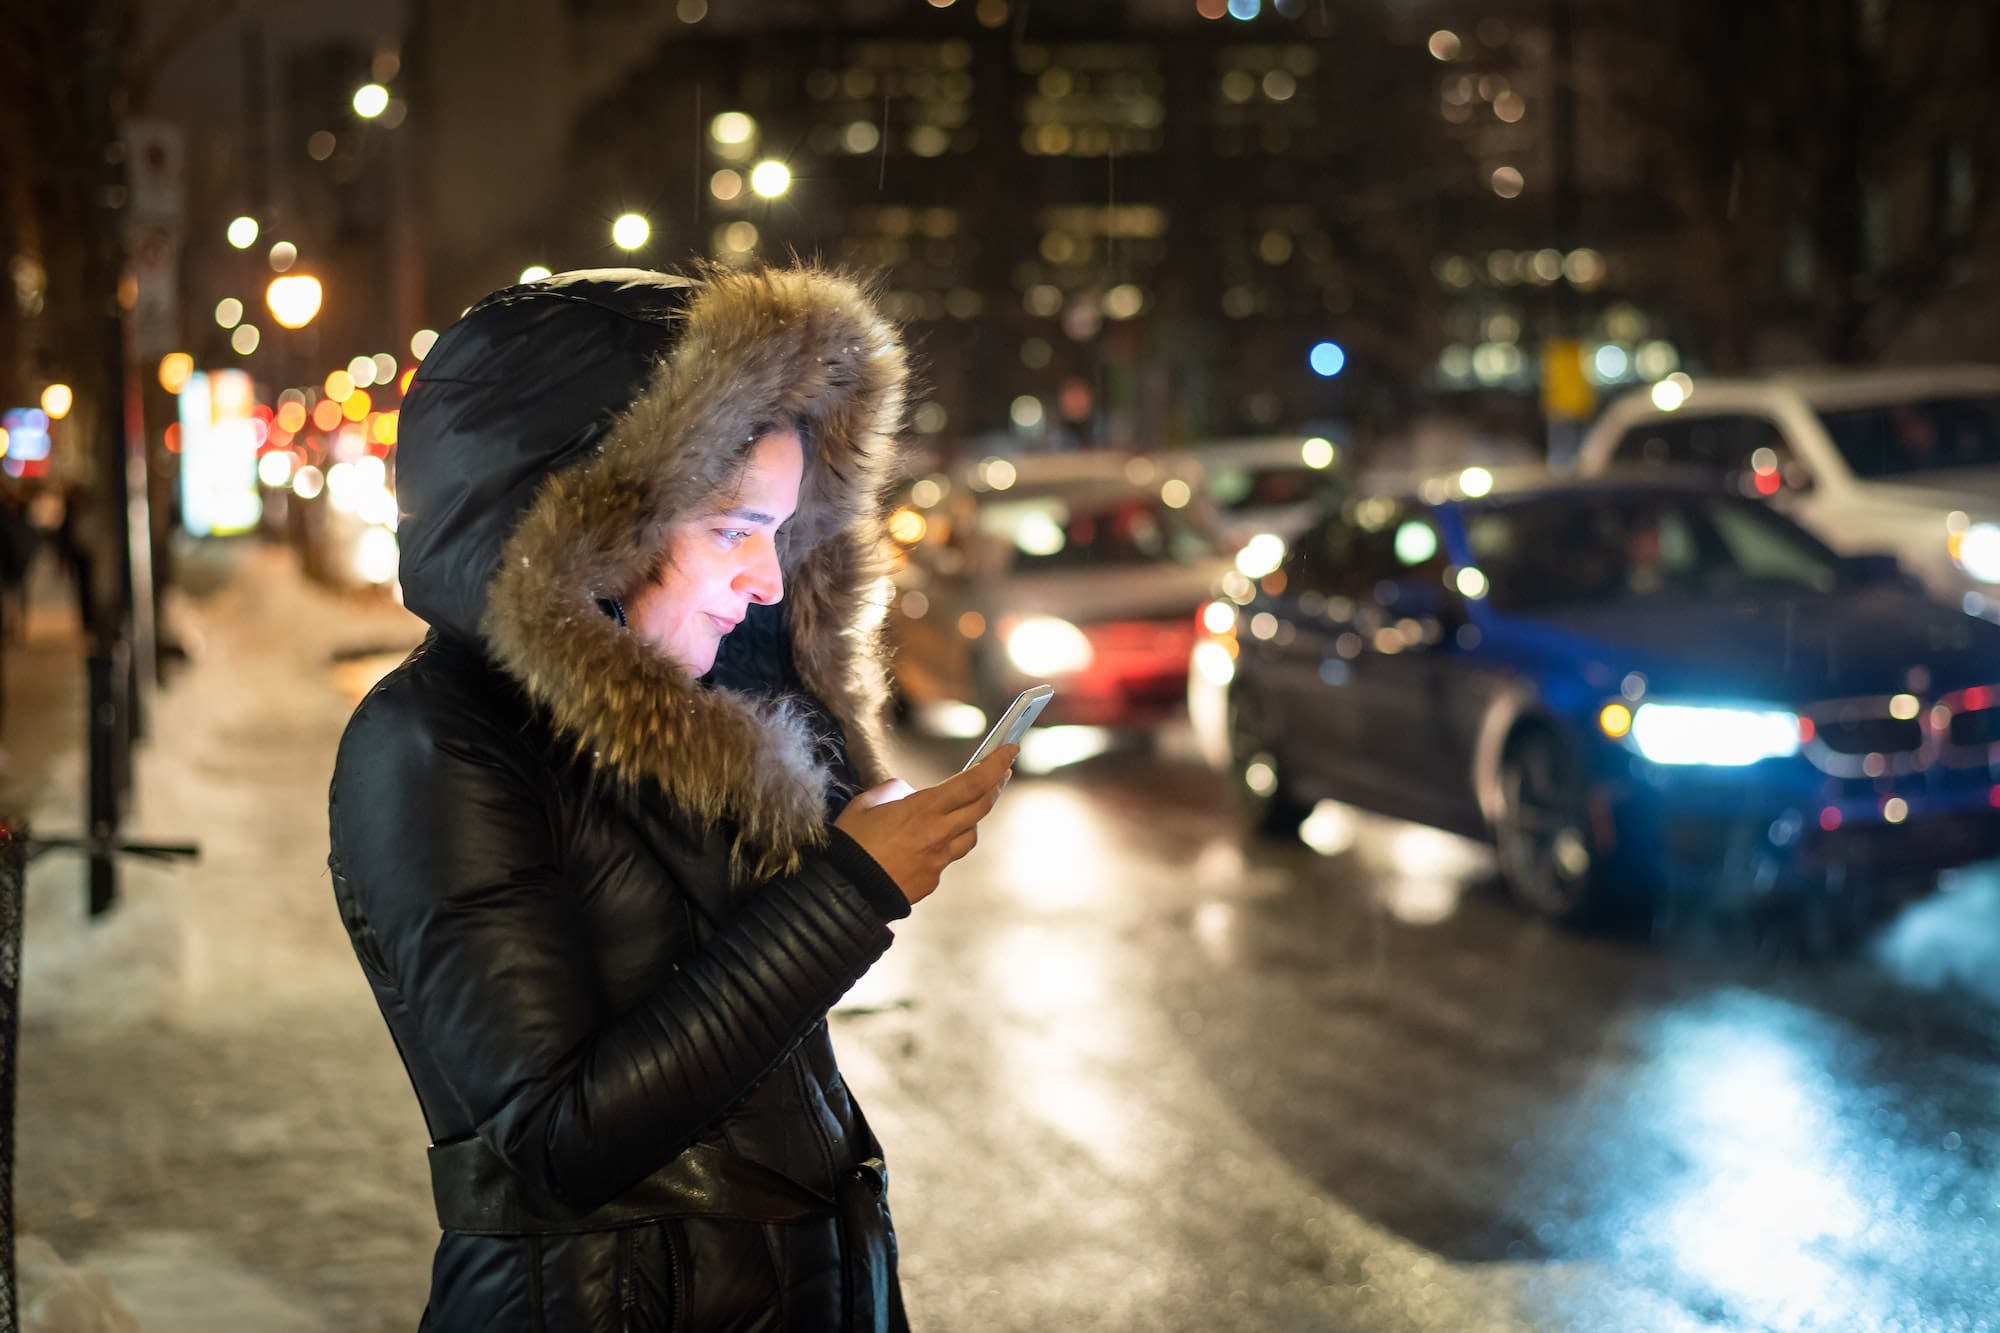 Passenger on a city street using her smartphone, possibly hailing an Uber, amidst the ongoing legal controversies surrounding the rideshare industry.